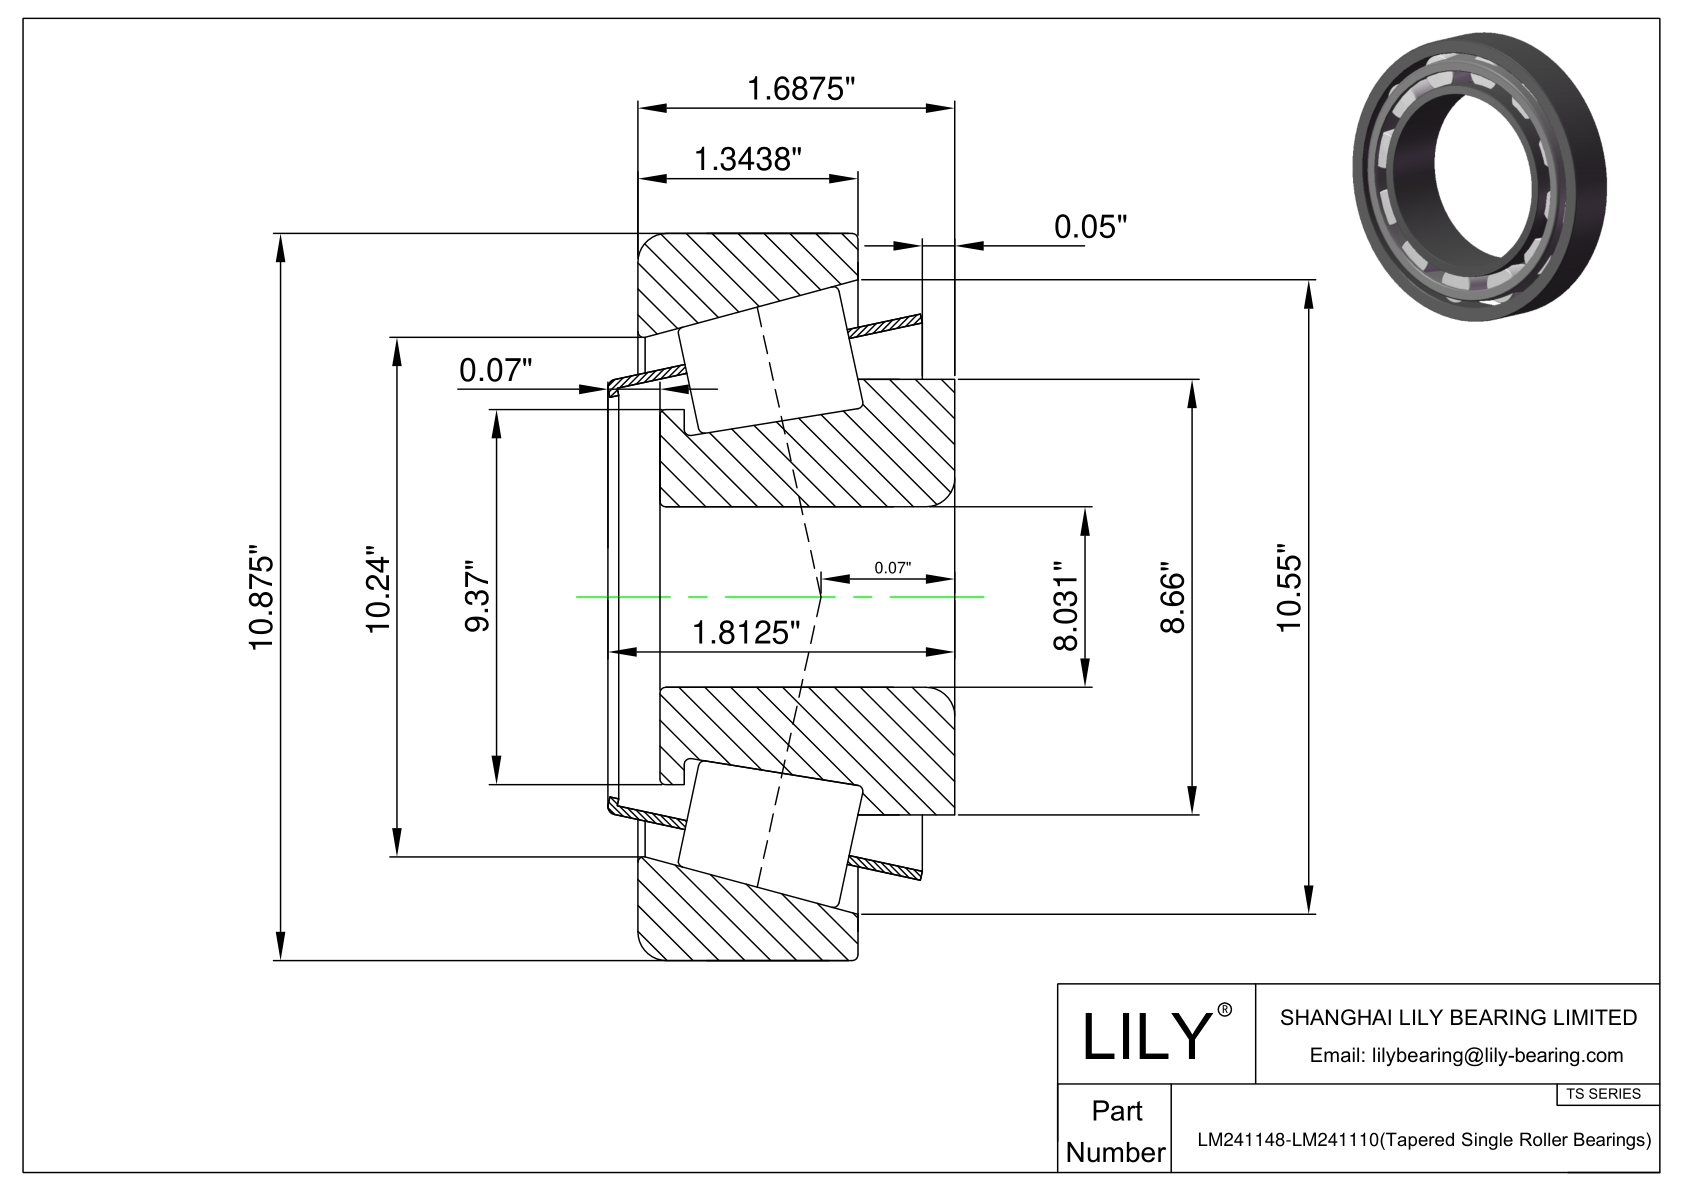 LM241148-LM241110 TS (Tapered Single Roller Bearings) (Imperial) cad drawing